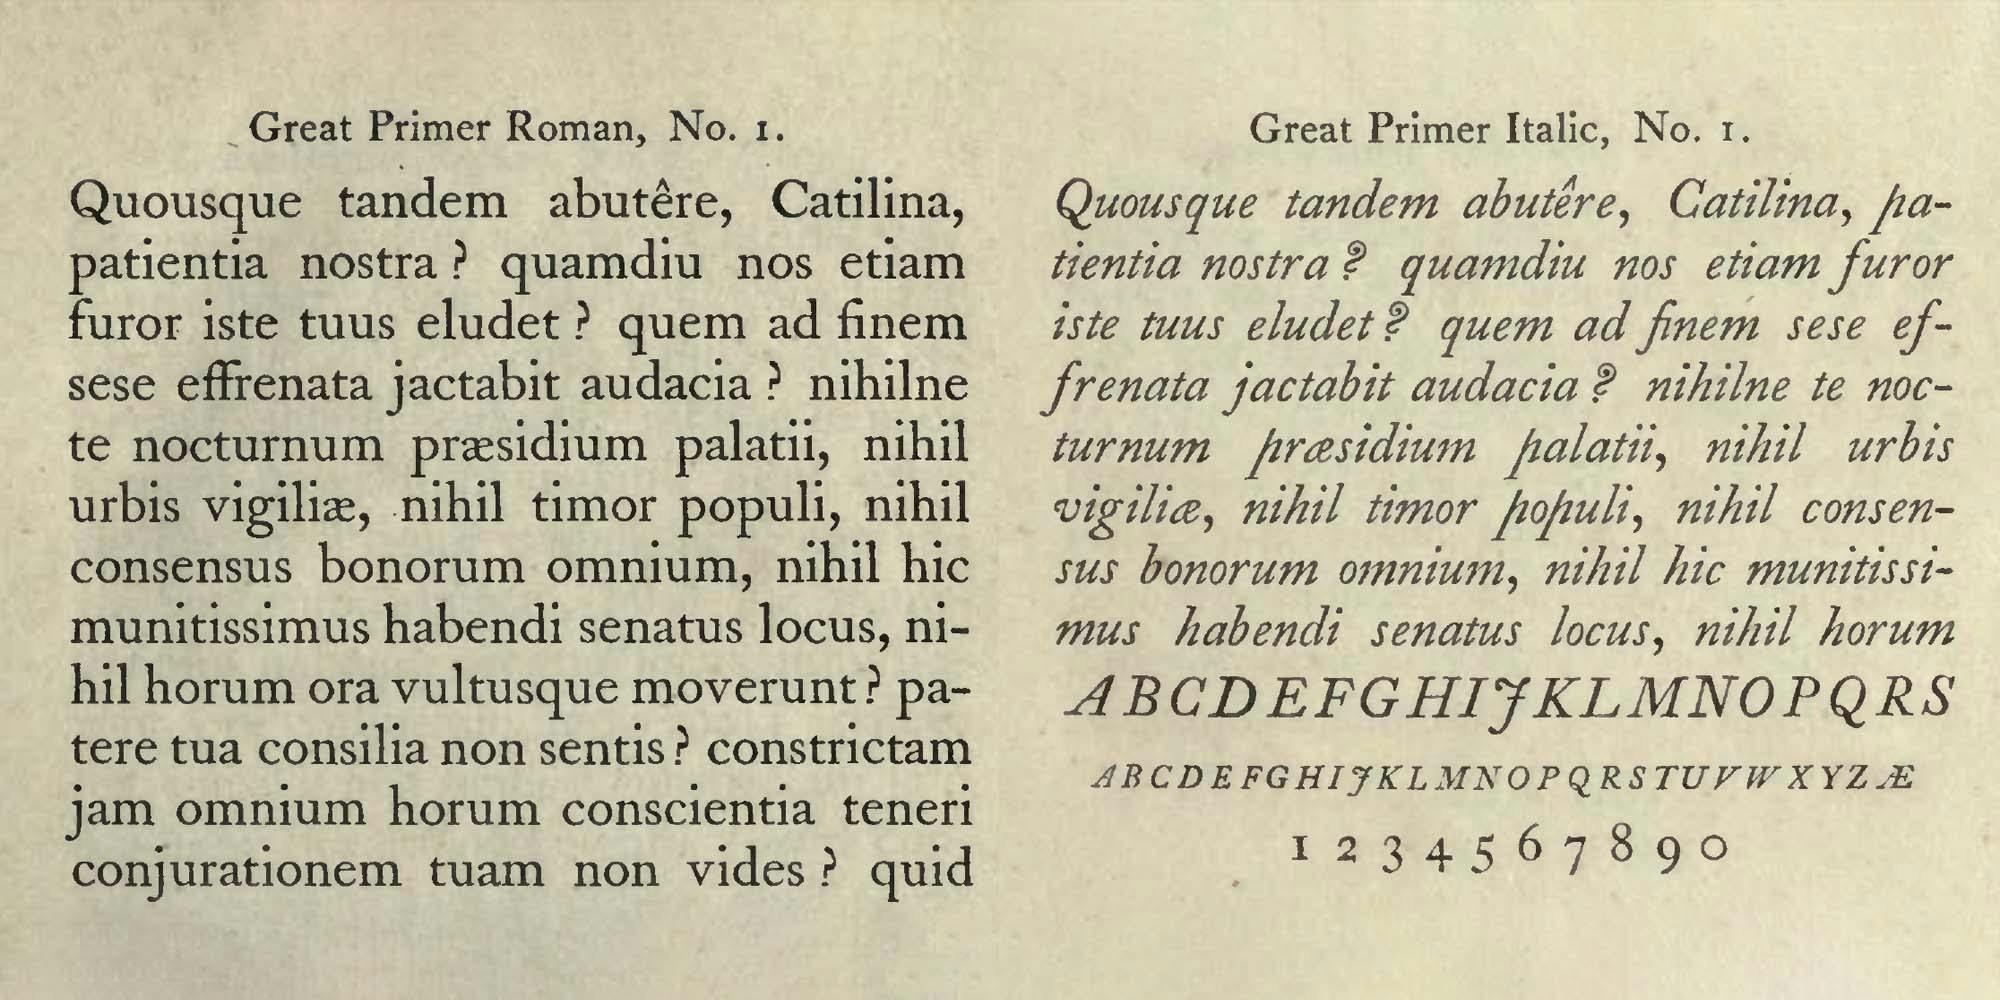 A Specimen of Printing Types, a digital scan of the 1796 book used as the starting point of William